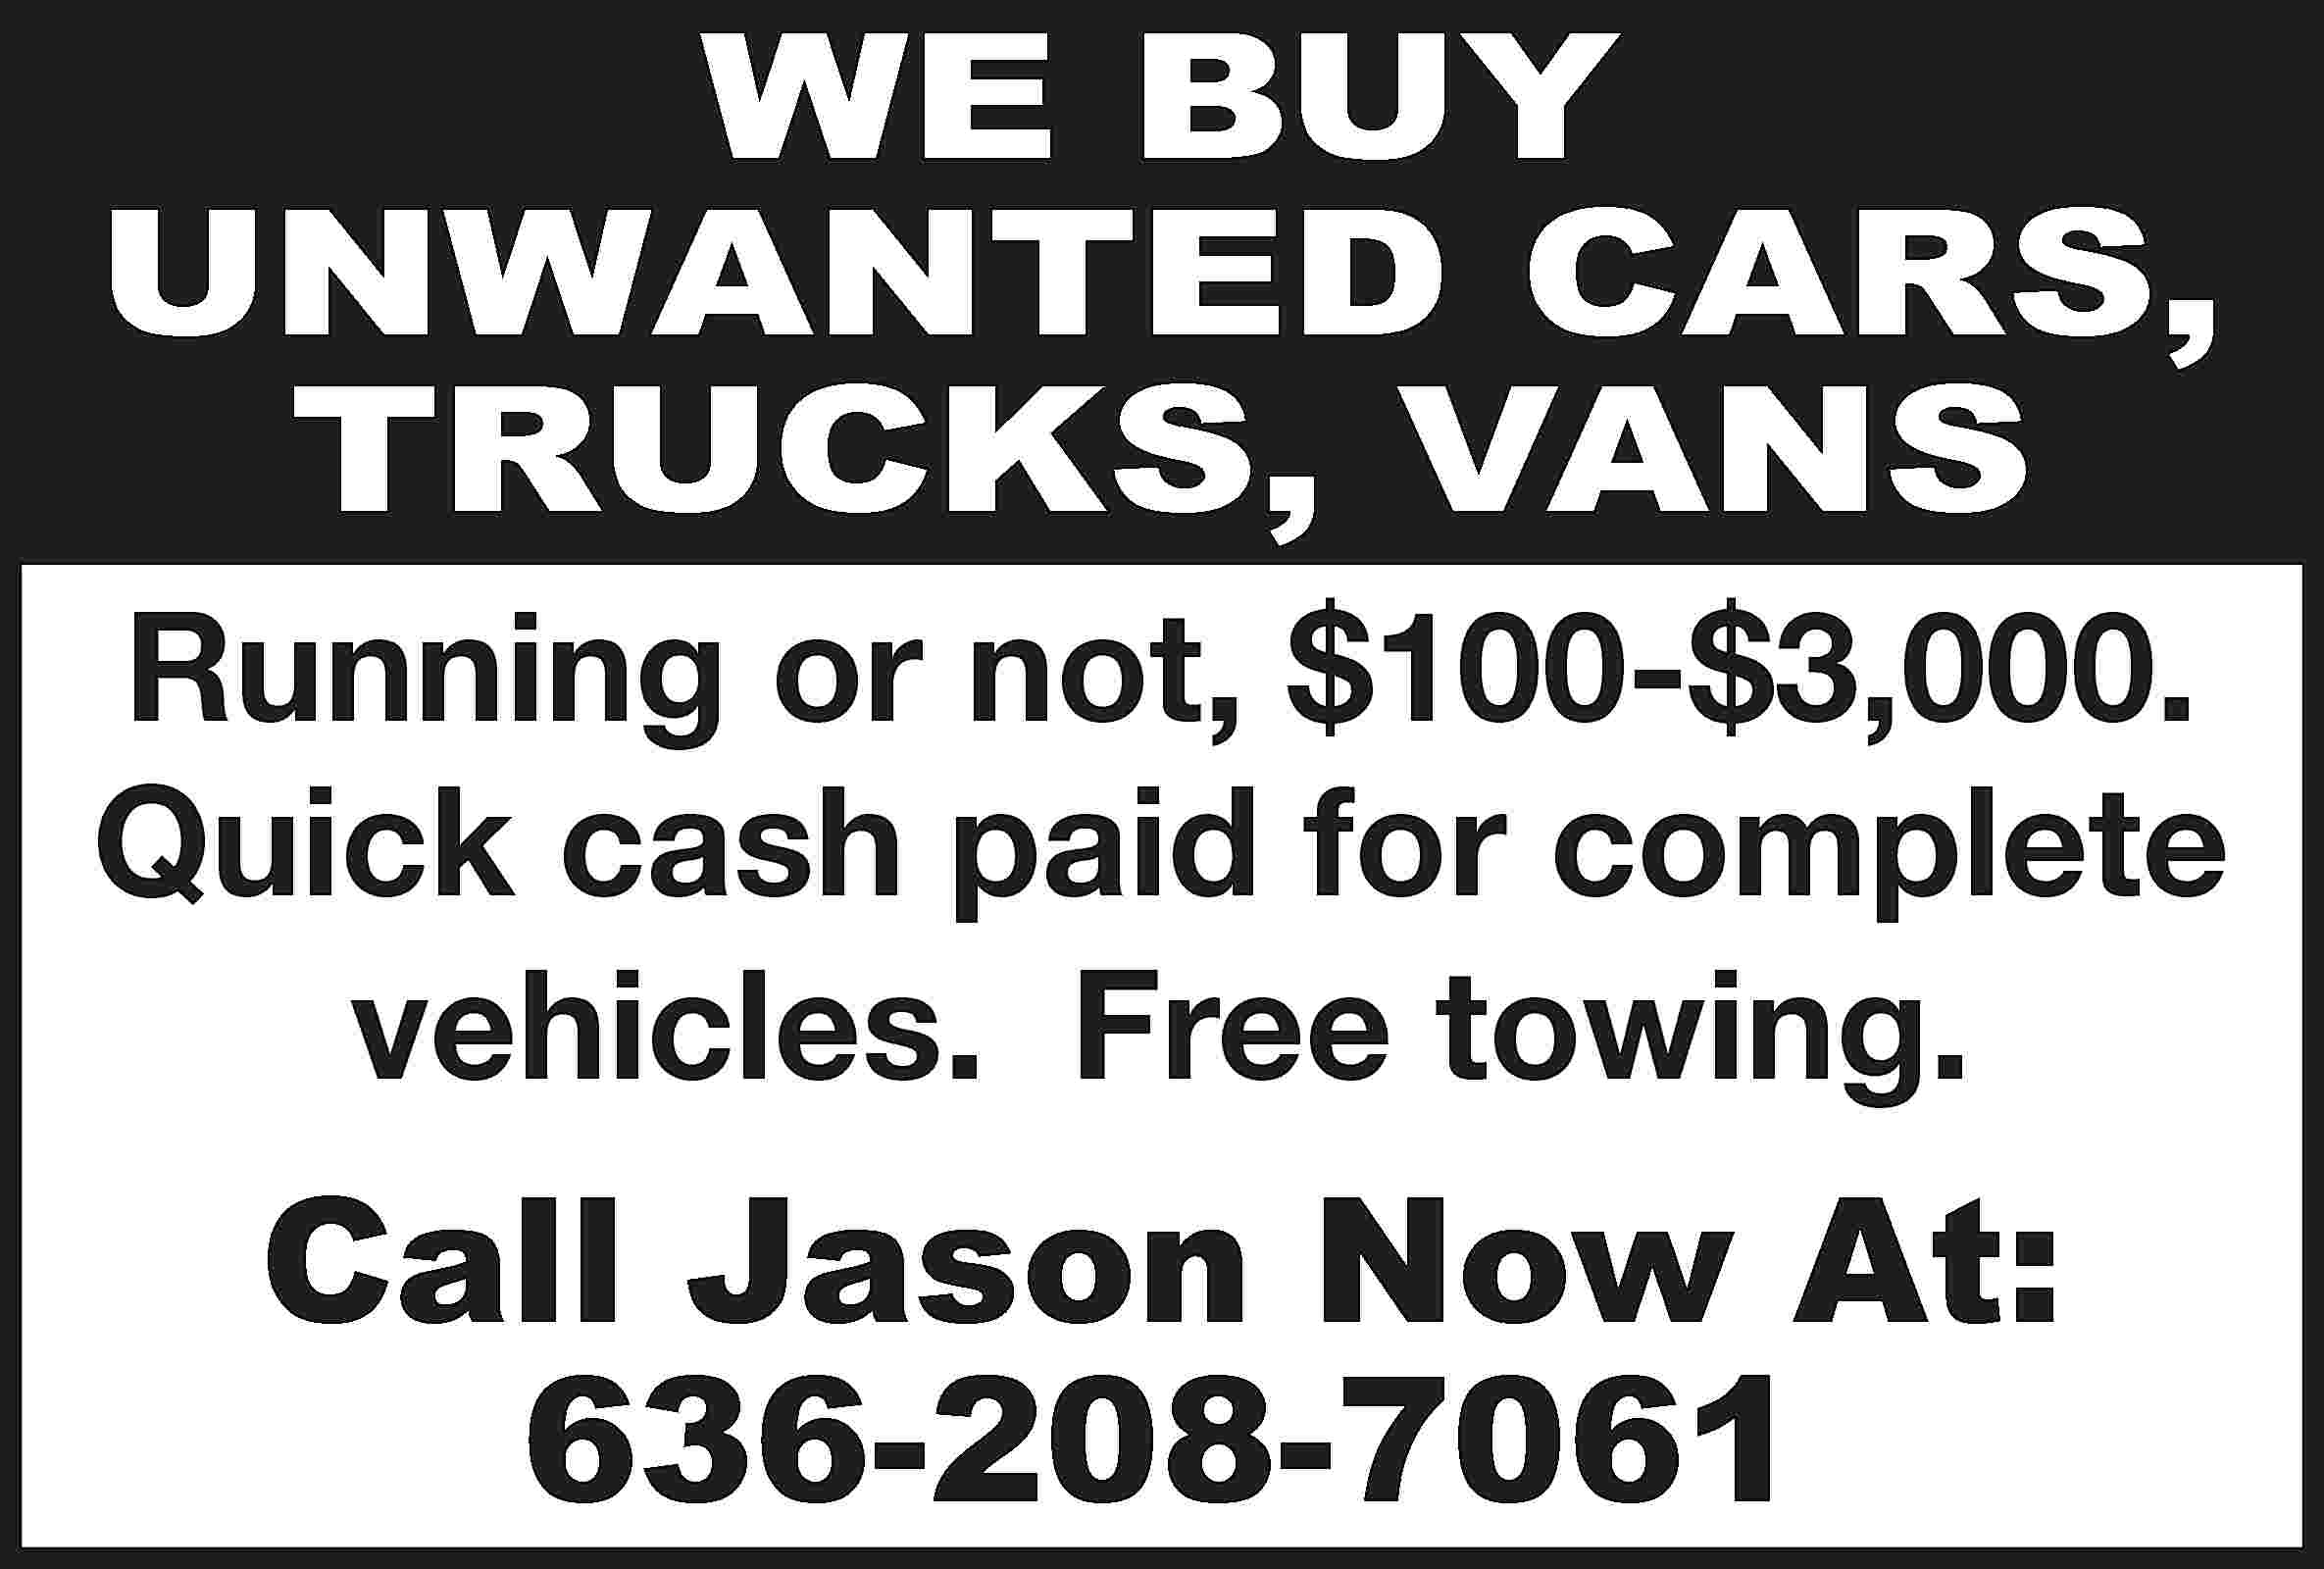 WE BUY UNWANTED CARS, TRUCKS,  WE BUY UNWANTED CARS, TRUCKS, VANS Running or not, $100-$3,000. Quick cash paid for complete vehicles. Free towing. Call Jason Now At: 636-208-7061